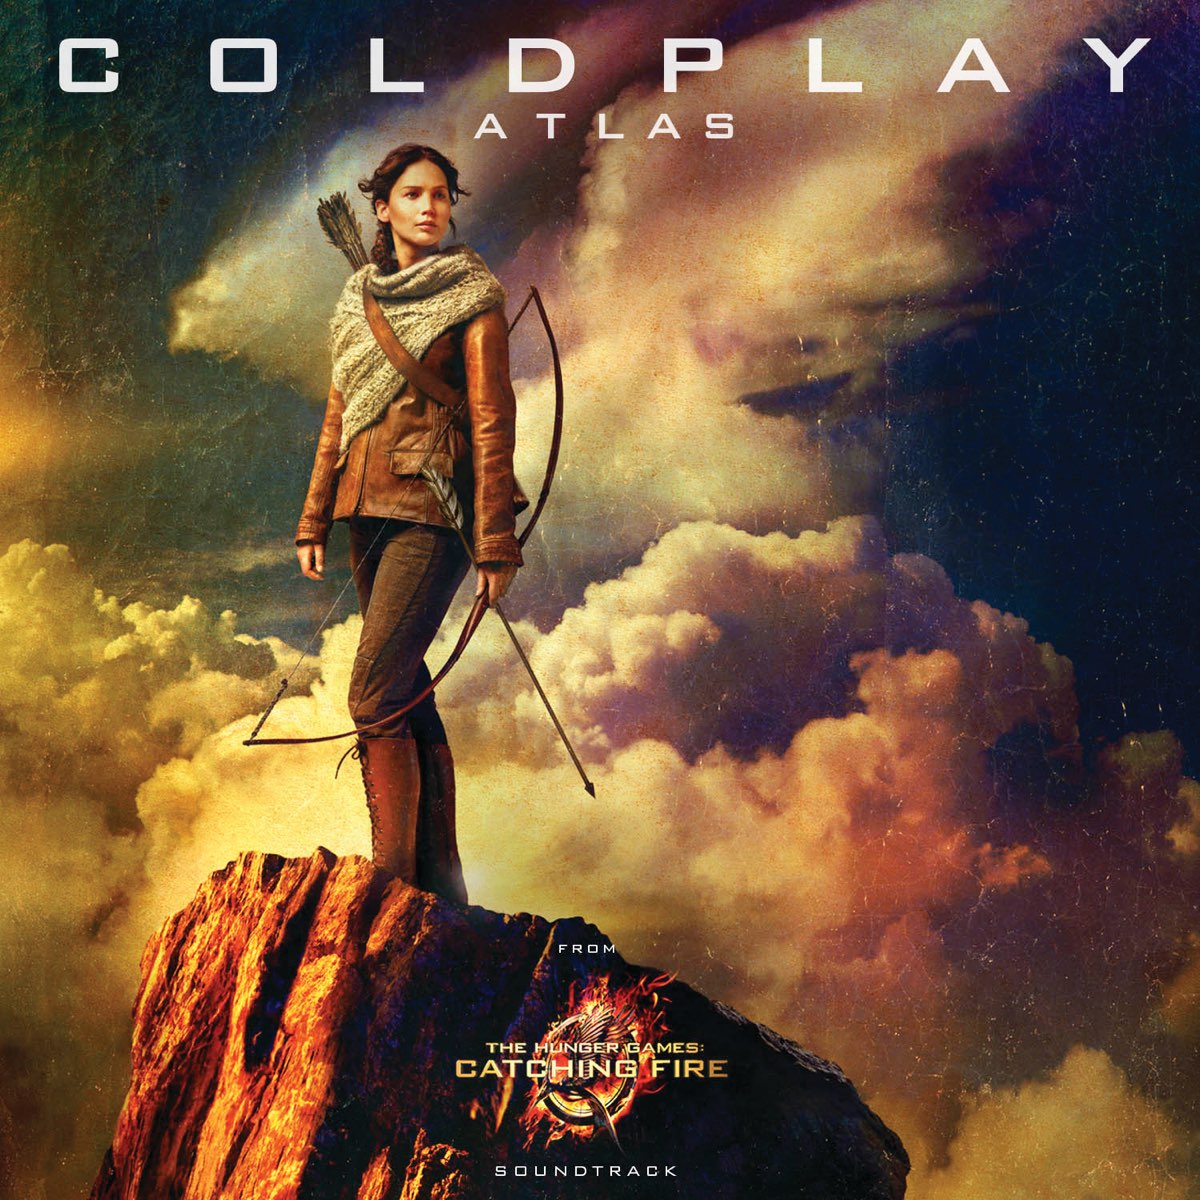 ‎atlas From The Hunger Games Catching Fire Soundtrack Single De Coldplay En Apple Music 9795